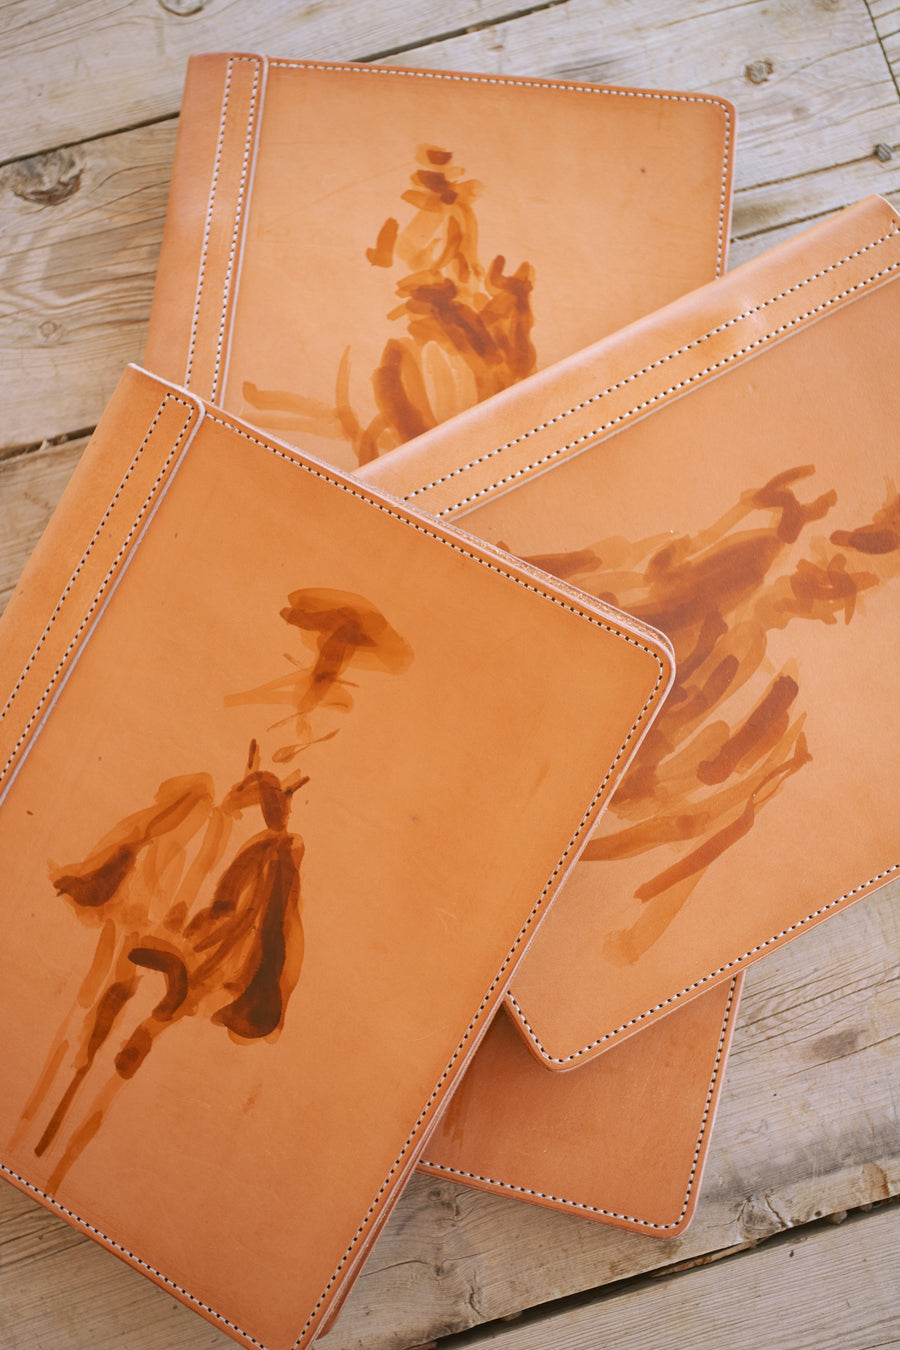 Ranchlands Mercantile is a collection of artful goods from makers around the world and handmade leather goods made on Chico Basin Ranch in Colorado, USA.